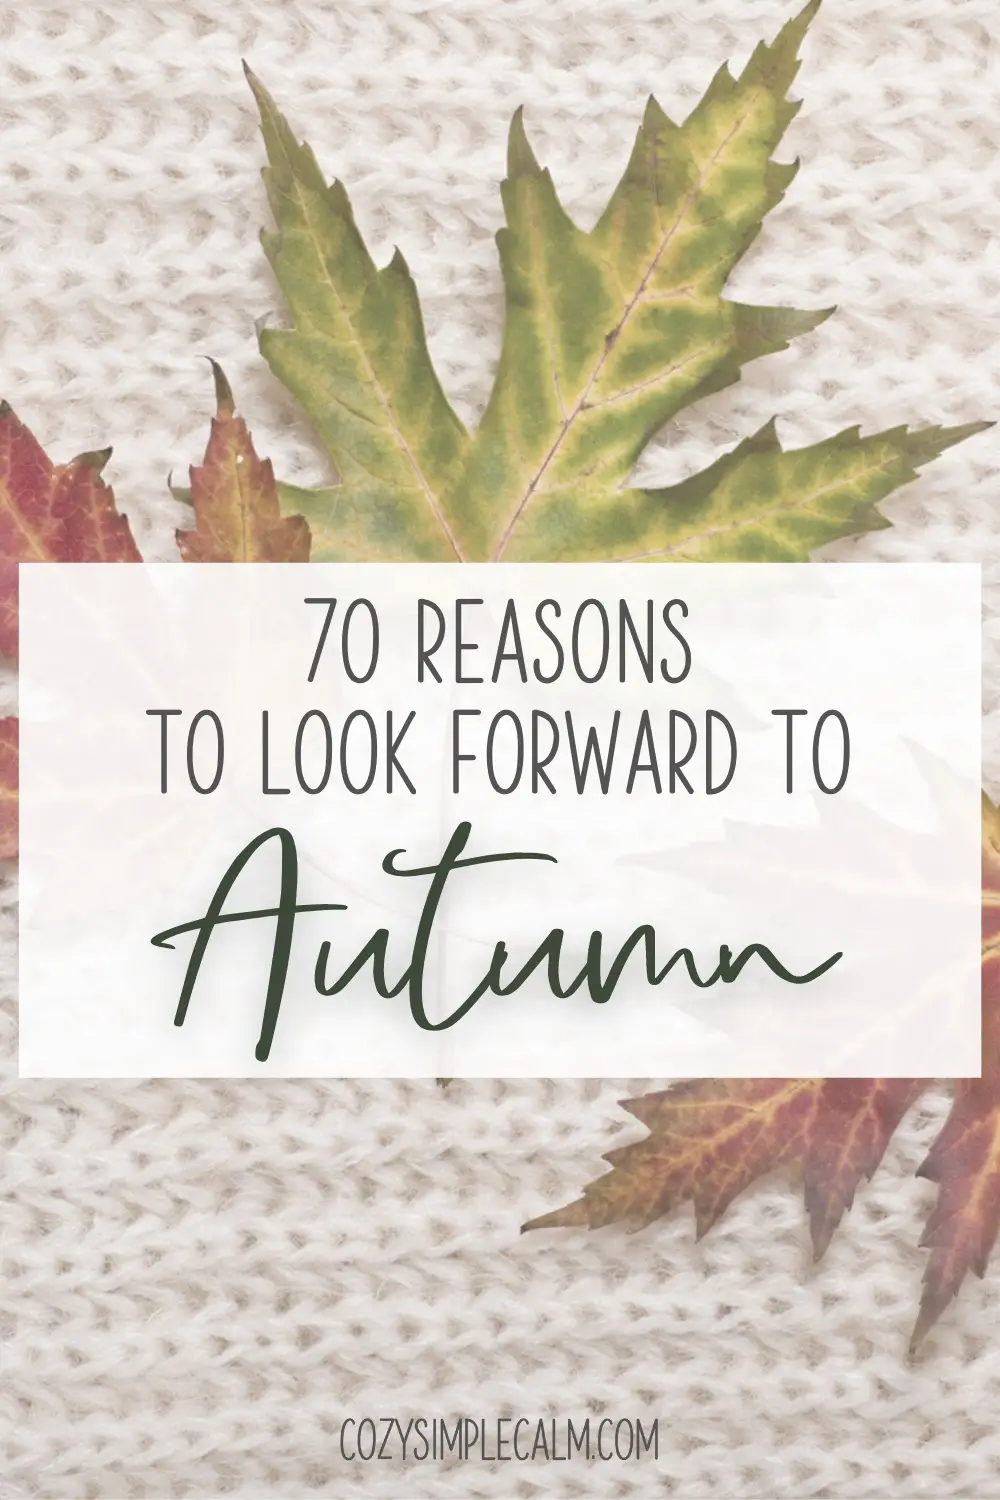 Image of fall leaves on white knit background - Text overlay: 70 reasons to look forward to autumn - cozysimplecalm.com